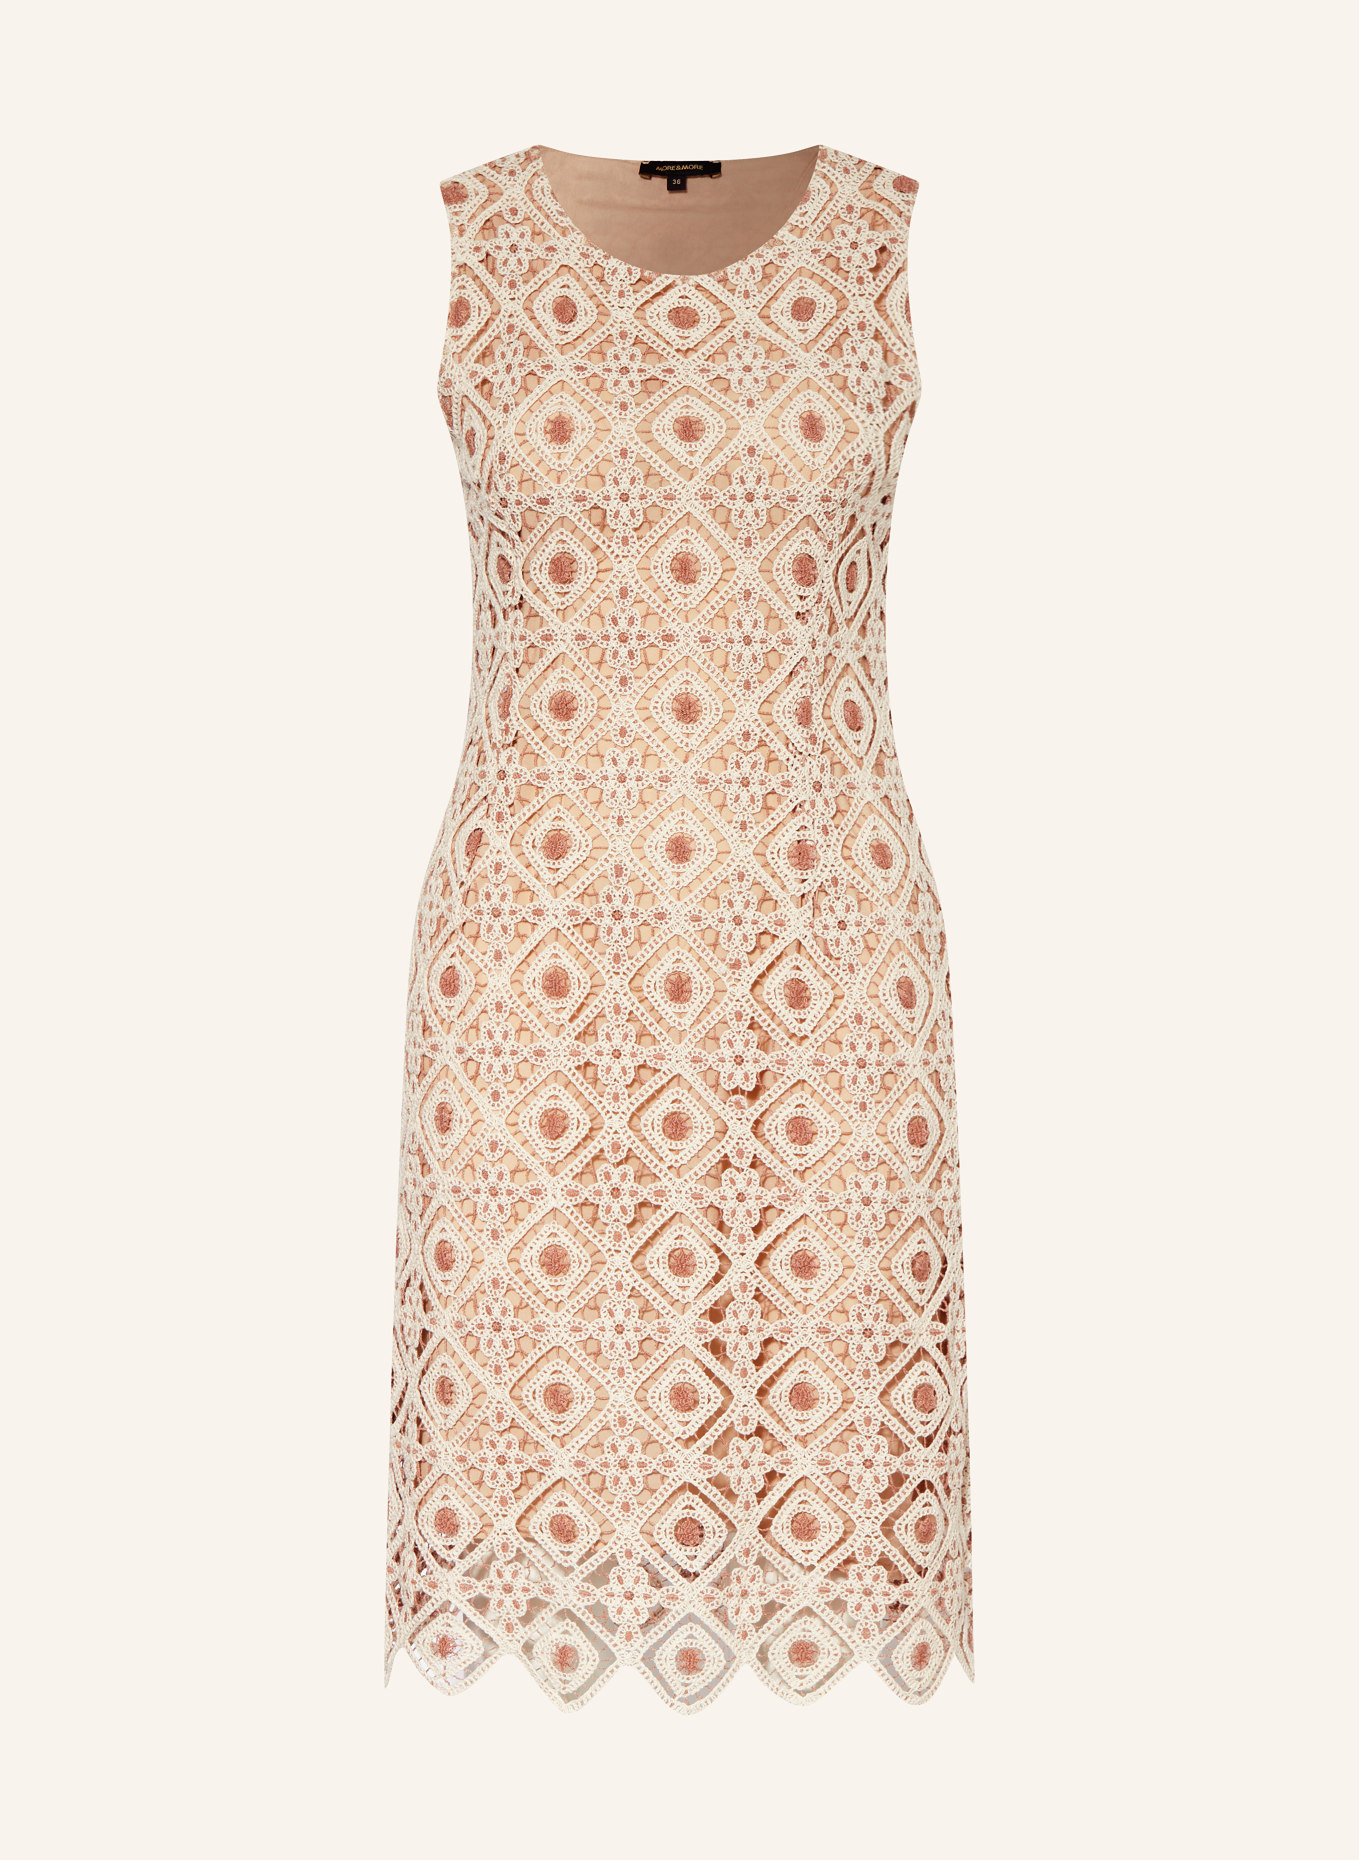 MORE & MORE Lace dress, Color: NUDE/ LIGHT BROWN (Image 1)